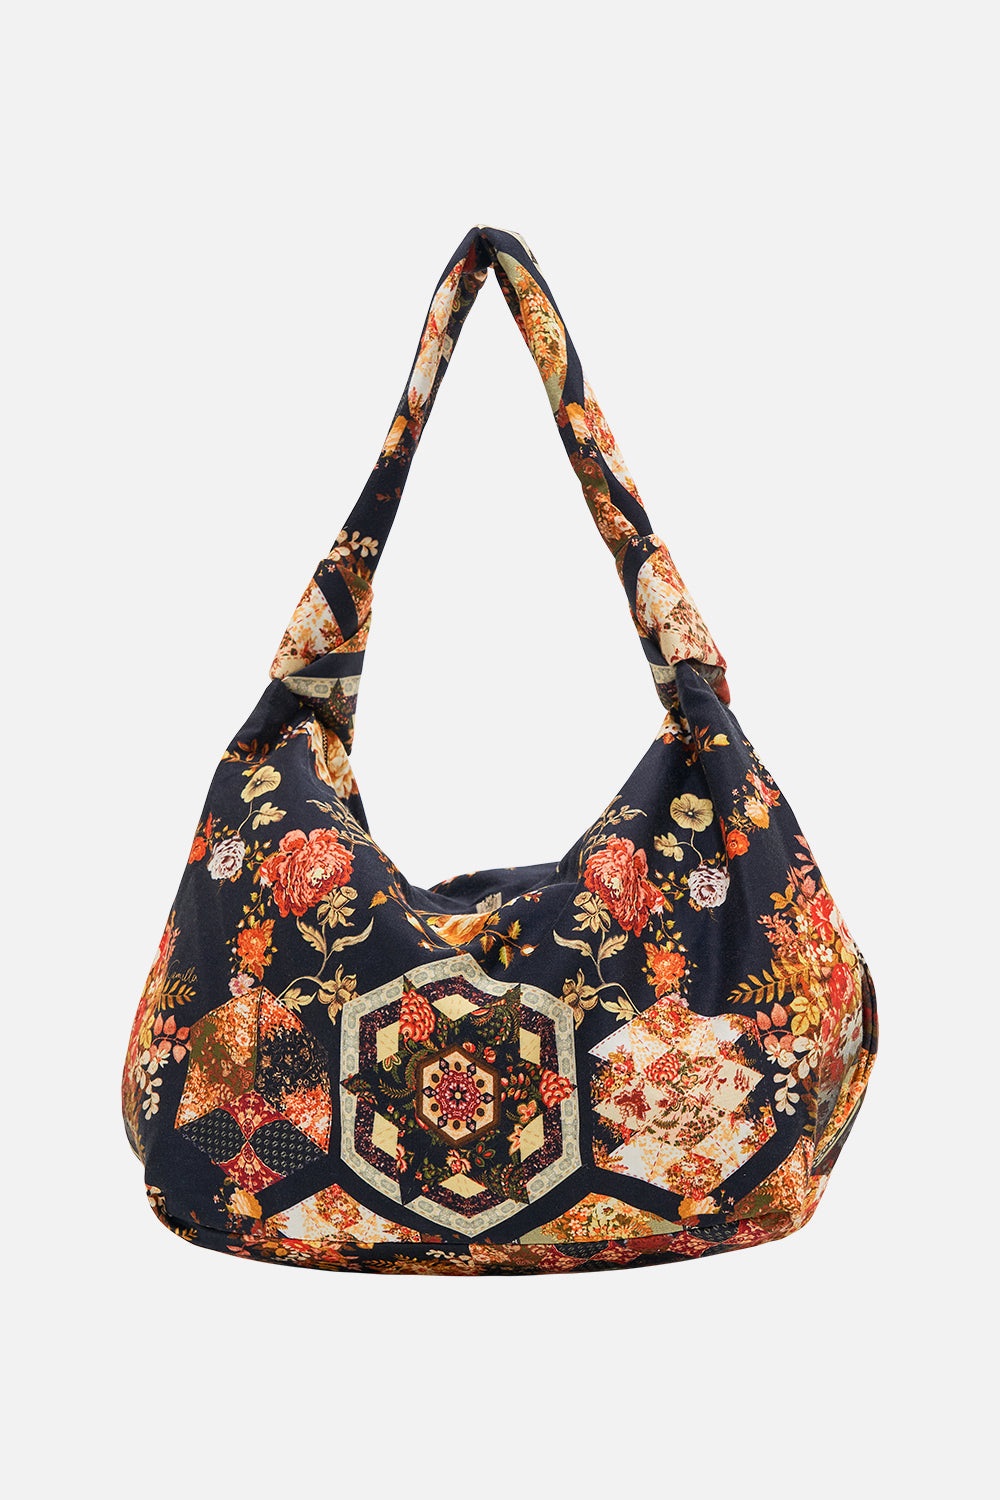 CAMILLA floral slouch shoulder bag in Stitched in Time